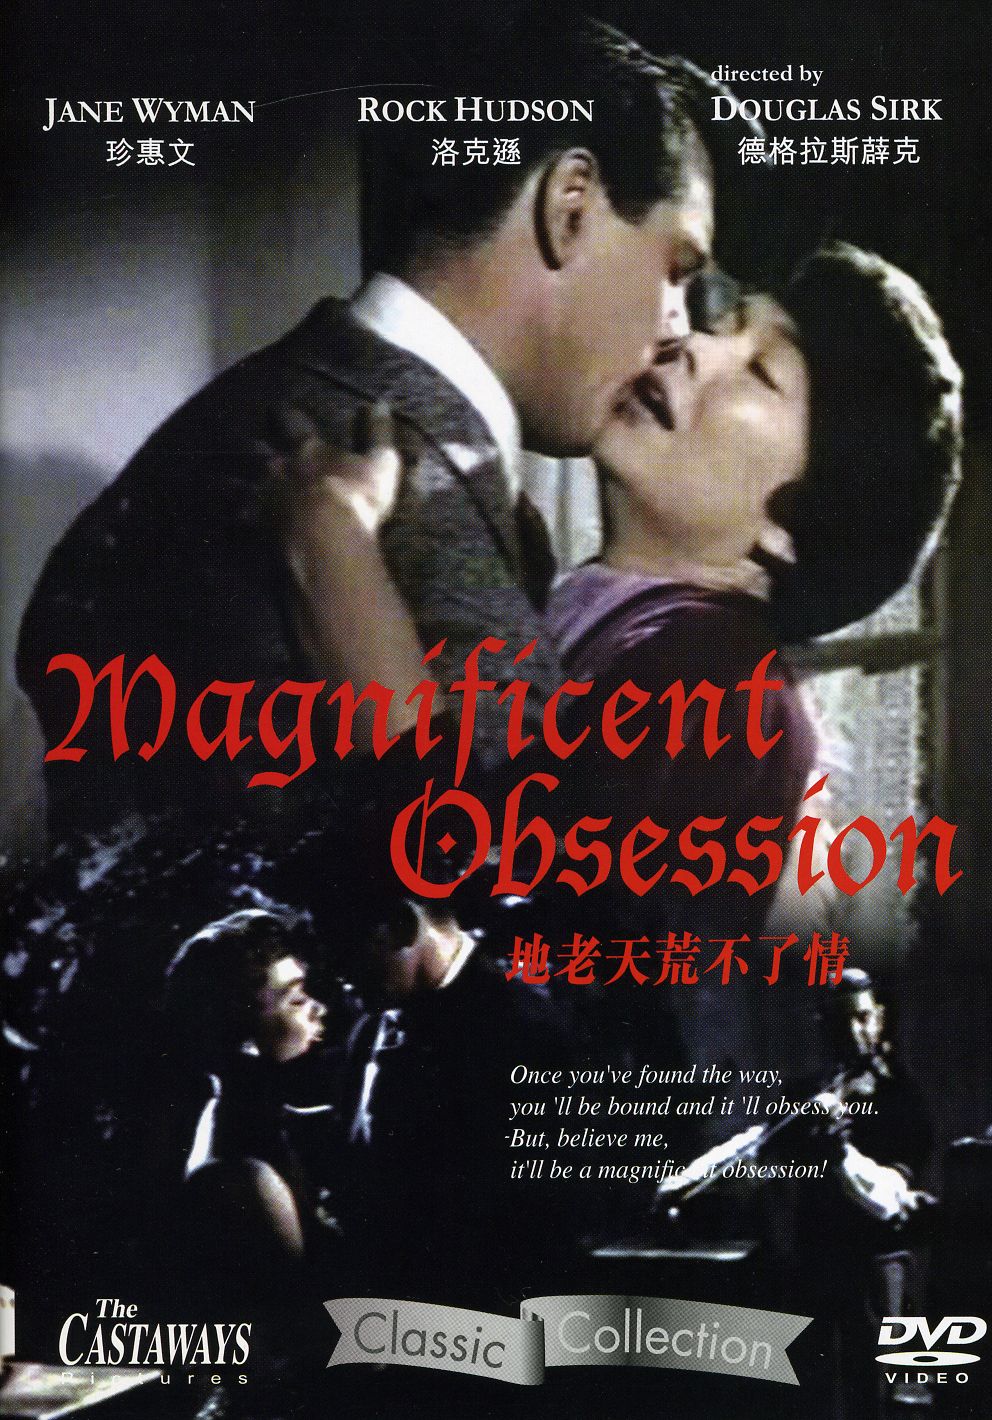 MAGNIFICENT OBSESSION